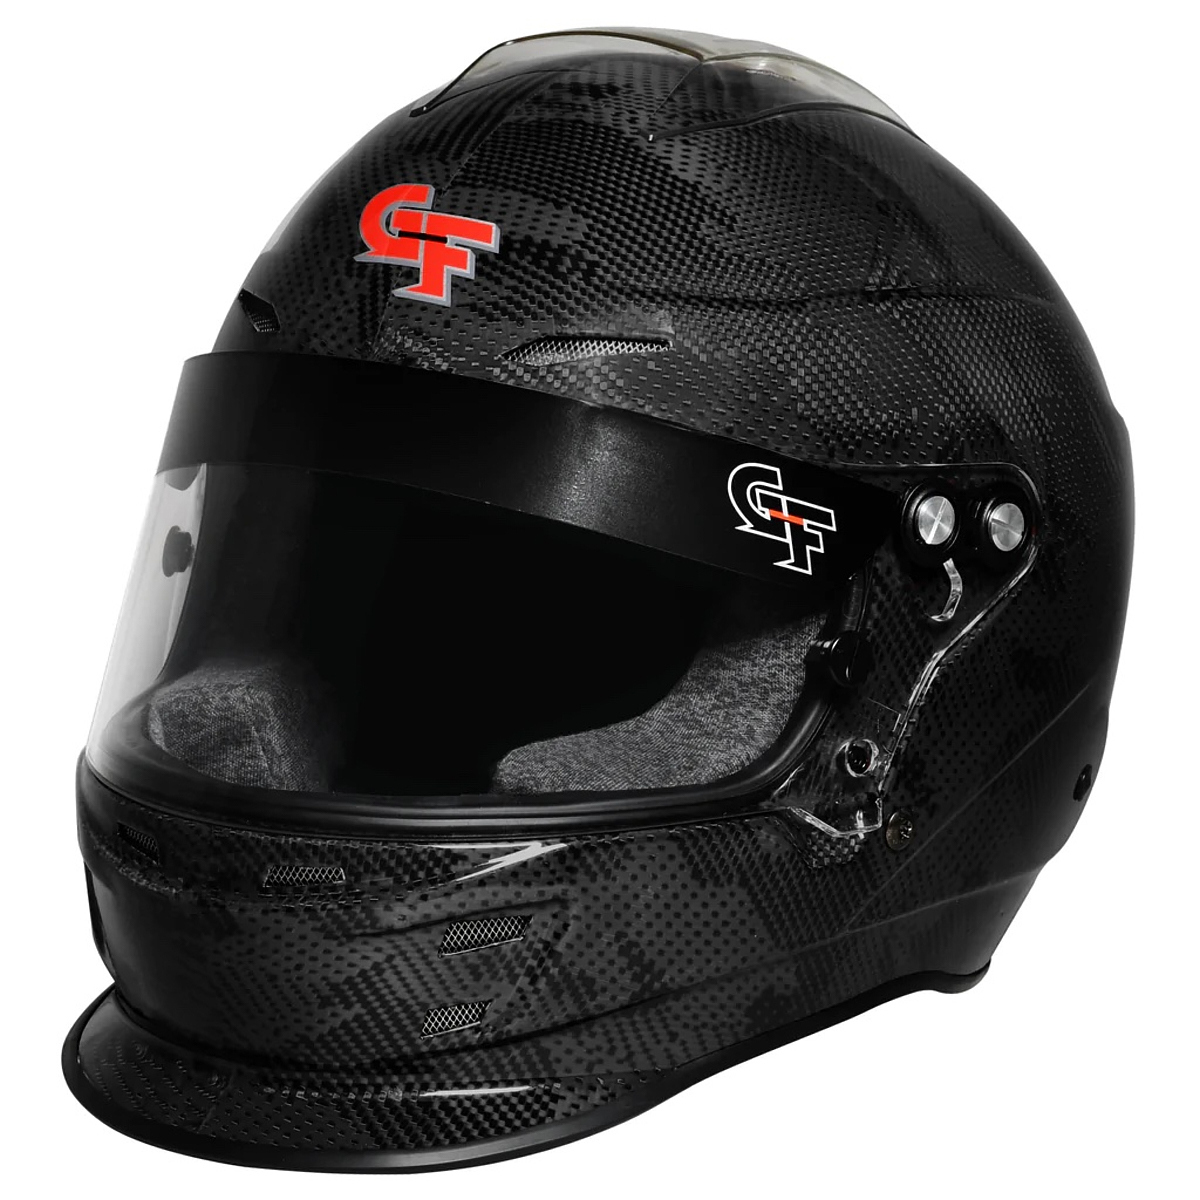 G-Force Racing Gear 16005XSMBK Helmet, Nova Fusion, Full Face, Snell SA 2020, Head and Neck Support Ready, Black, X-Small, Each